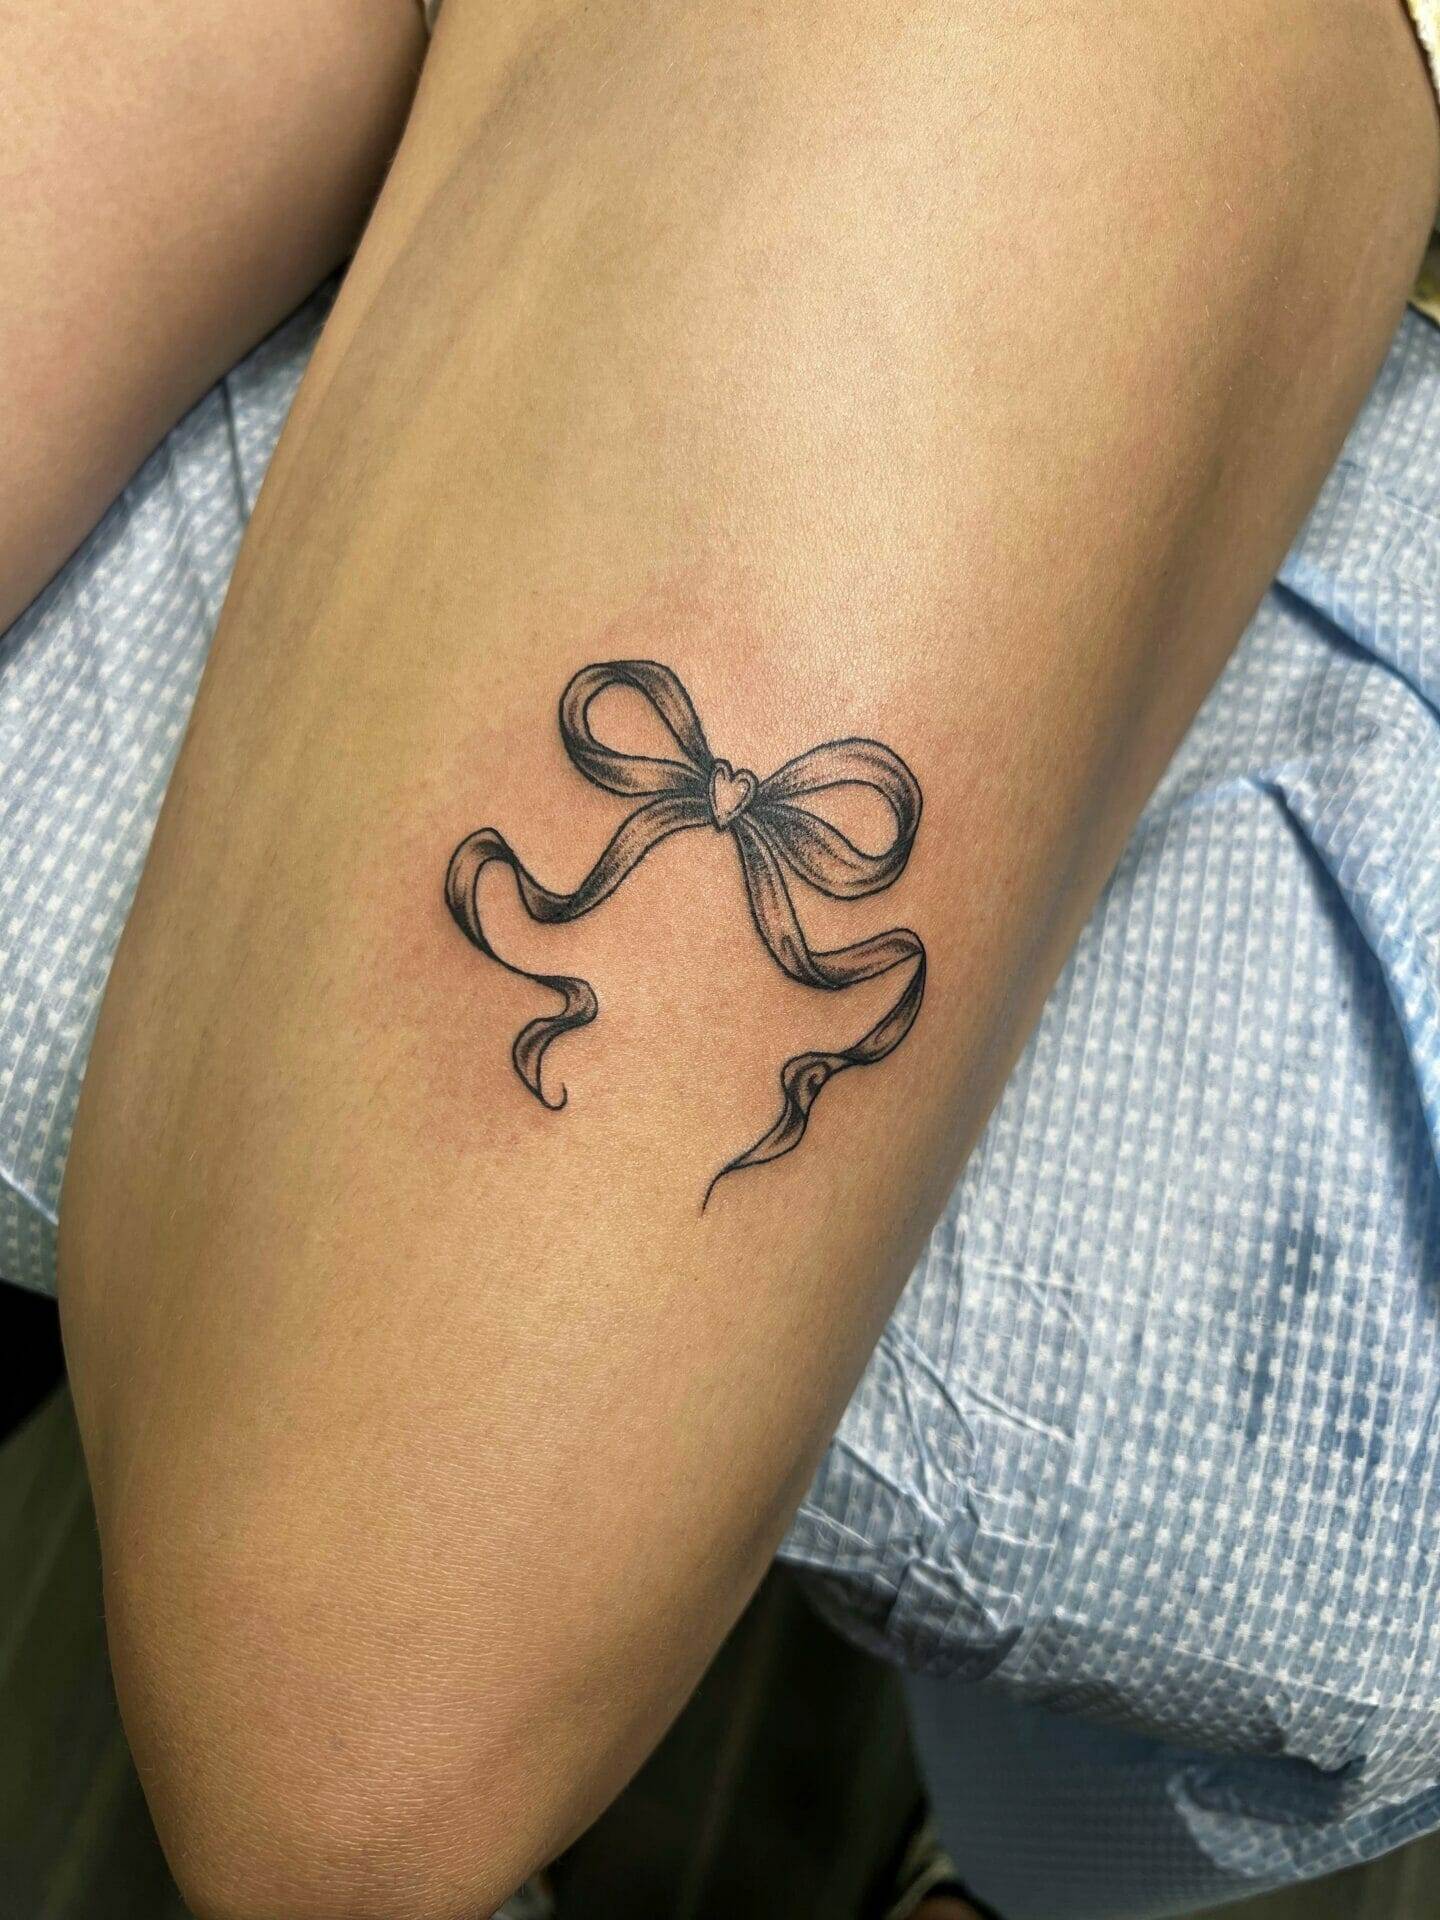 Minimalist Tattoo Ideas: 7 Simple Designs for Your Next Ink